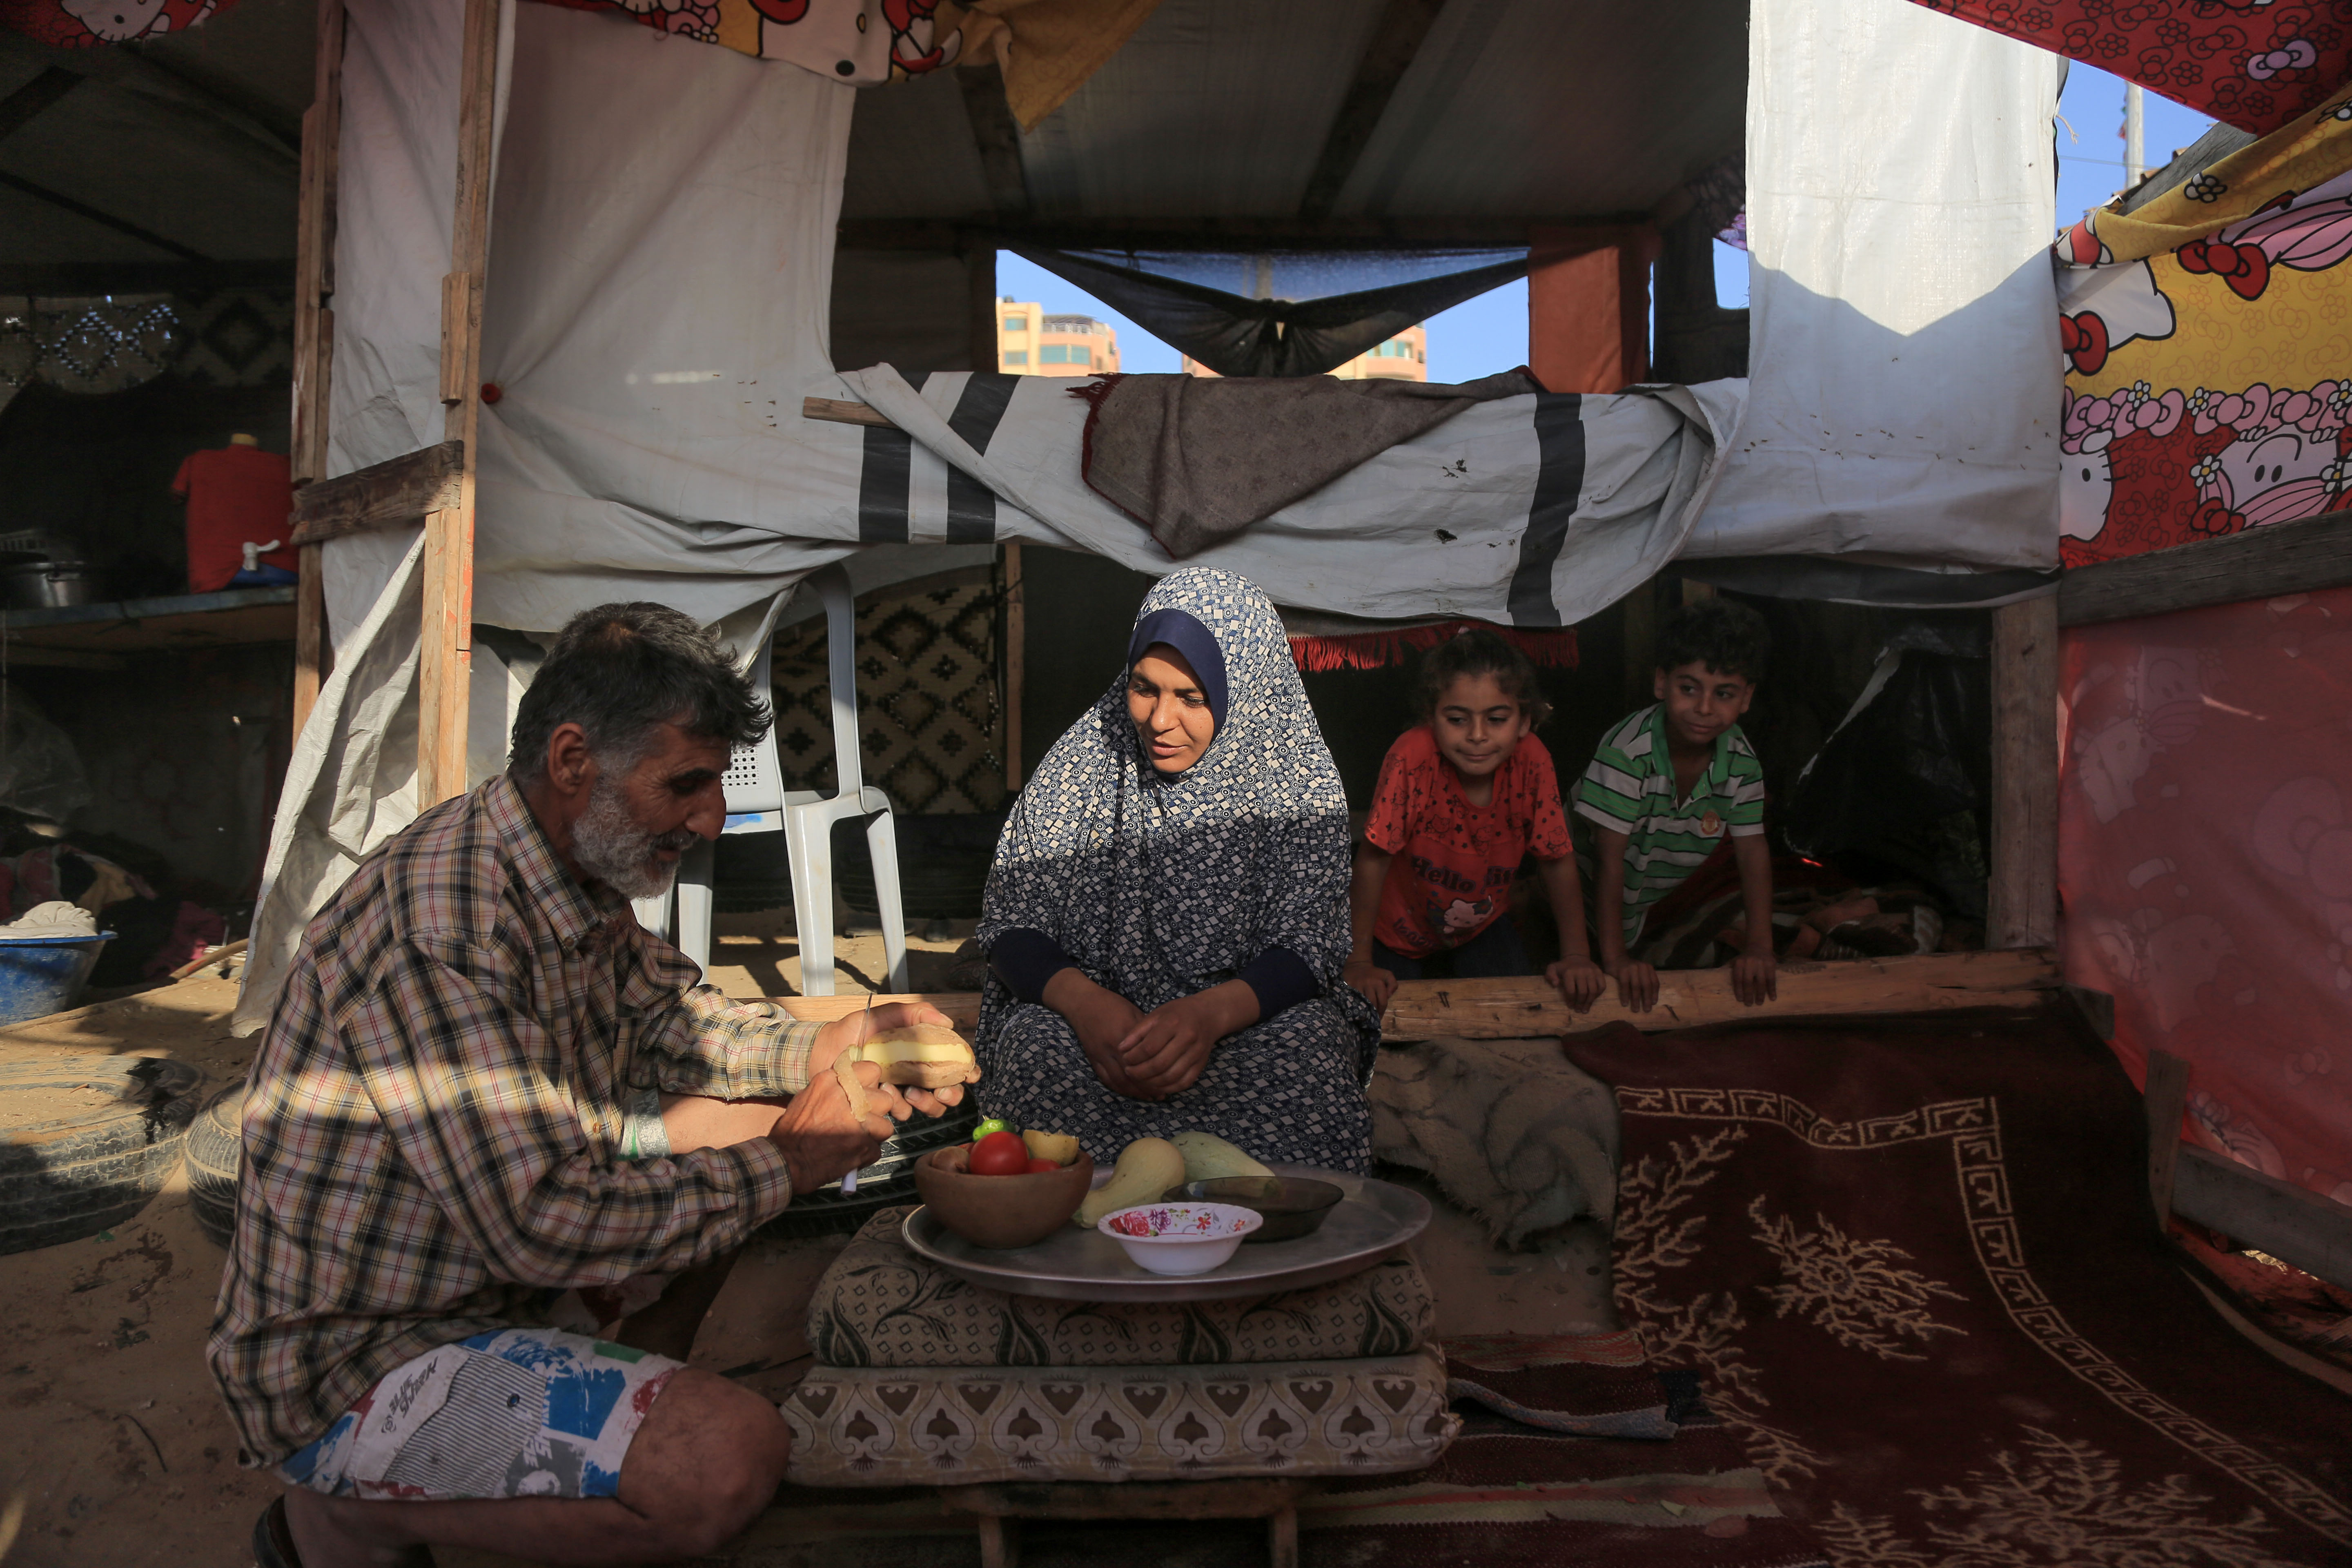 Hani peels a potato to be sliced and fried for the upcoming iftar meal as Malak and Ahmad watch with anticipation.